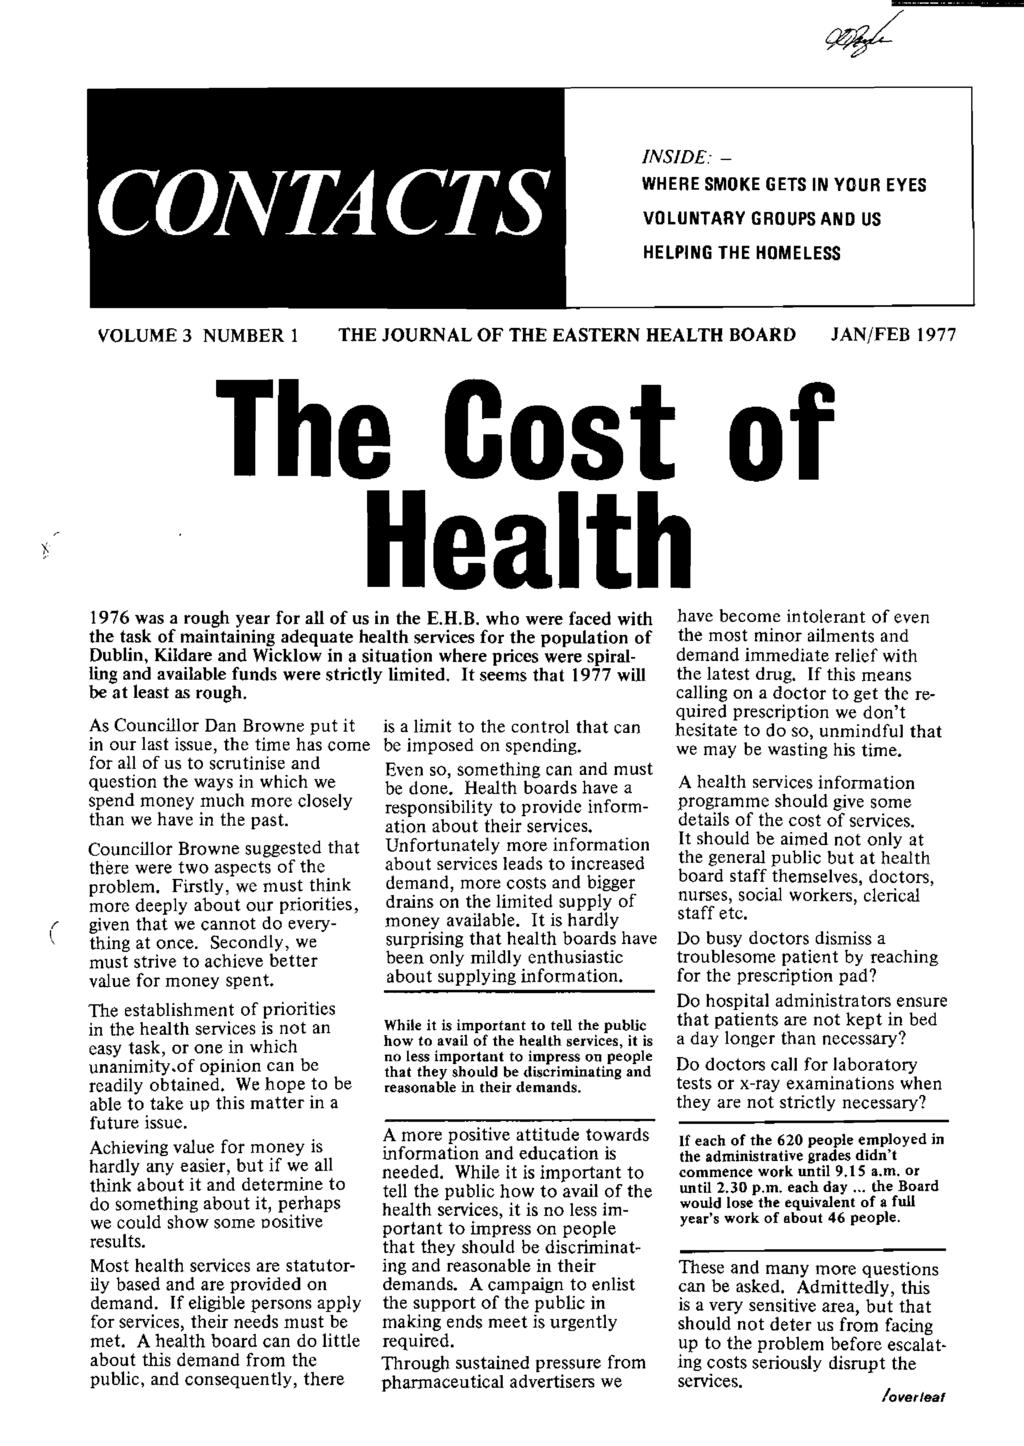 INSIDE:- WHERE SMOKE GETS IN YOUR EYES VOLUNTARY GROUPS AND US HELPING THE HOMELESS VOLUME 3 NUMBER 1 THE JOURNAL OF THE EASTERN HEALTH BOARD JAN/FEB 1977 The Cost of Health c 1976 was a rough year